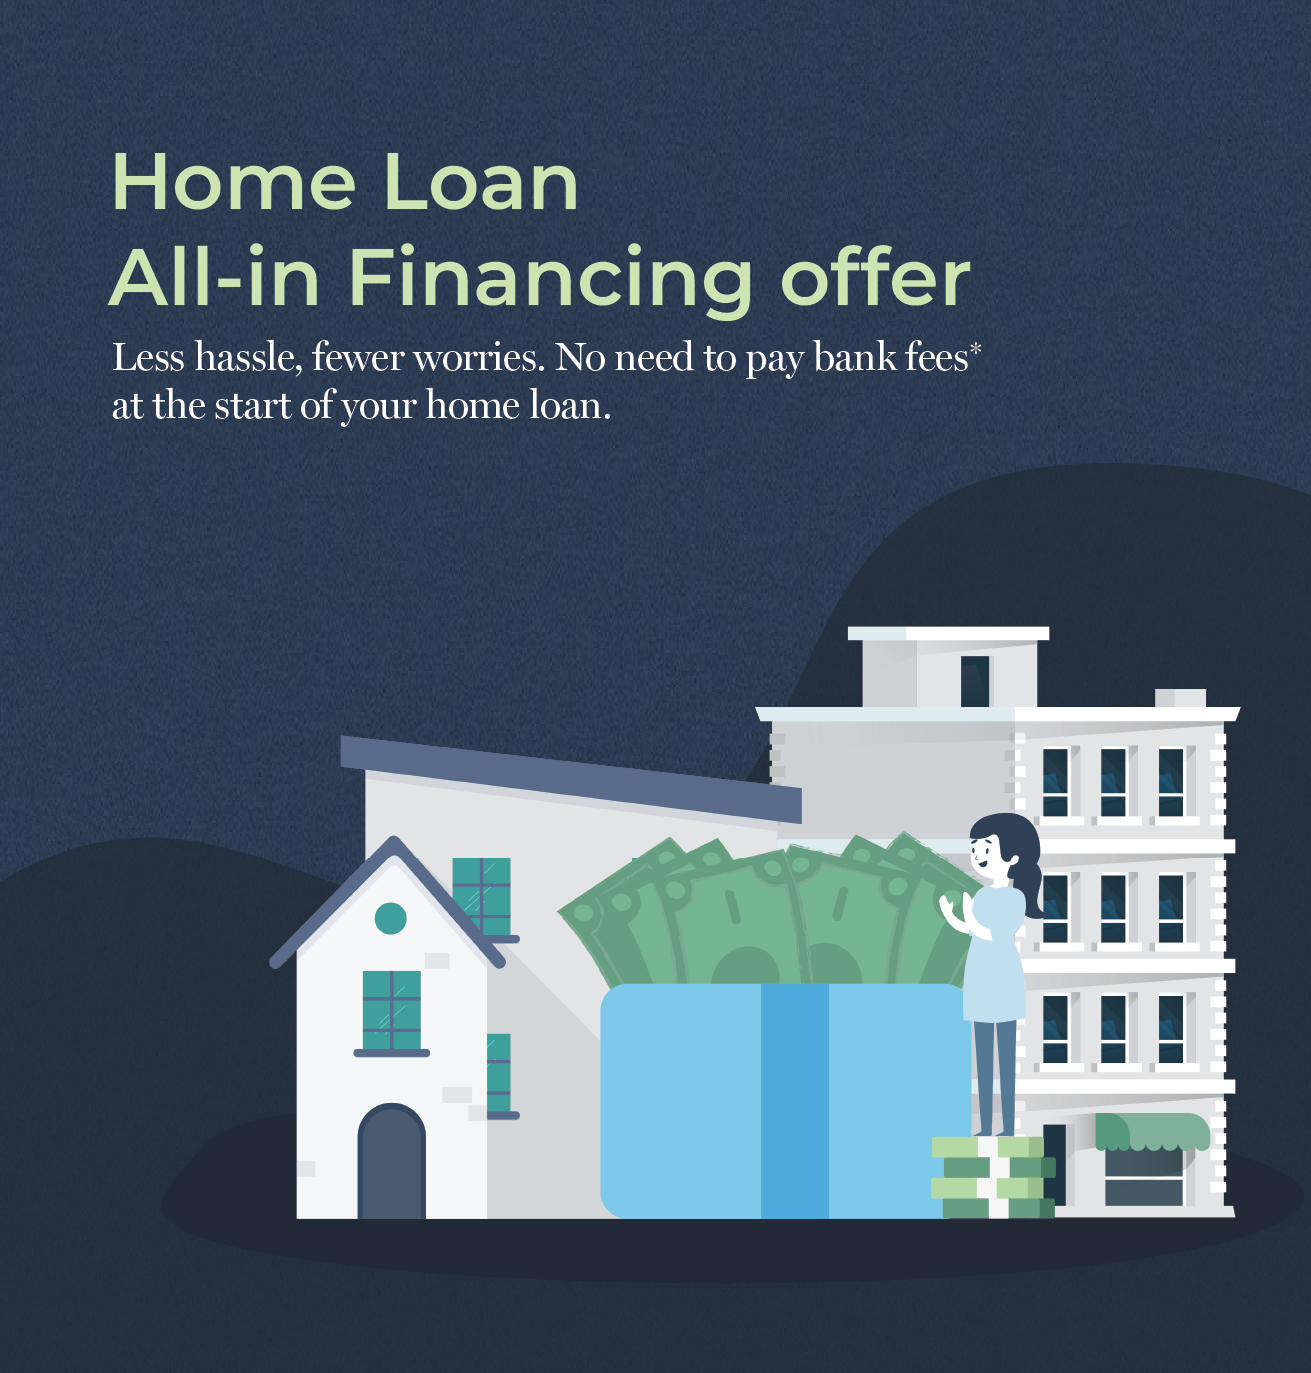 security bank home loan all-in financing - benefits